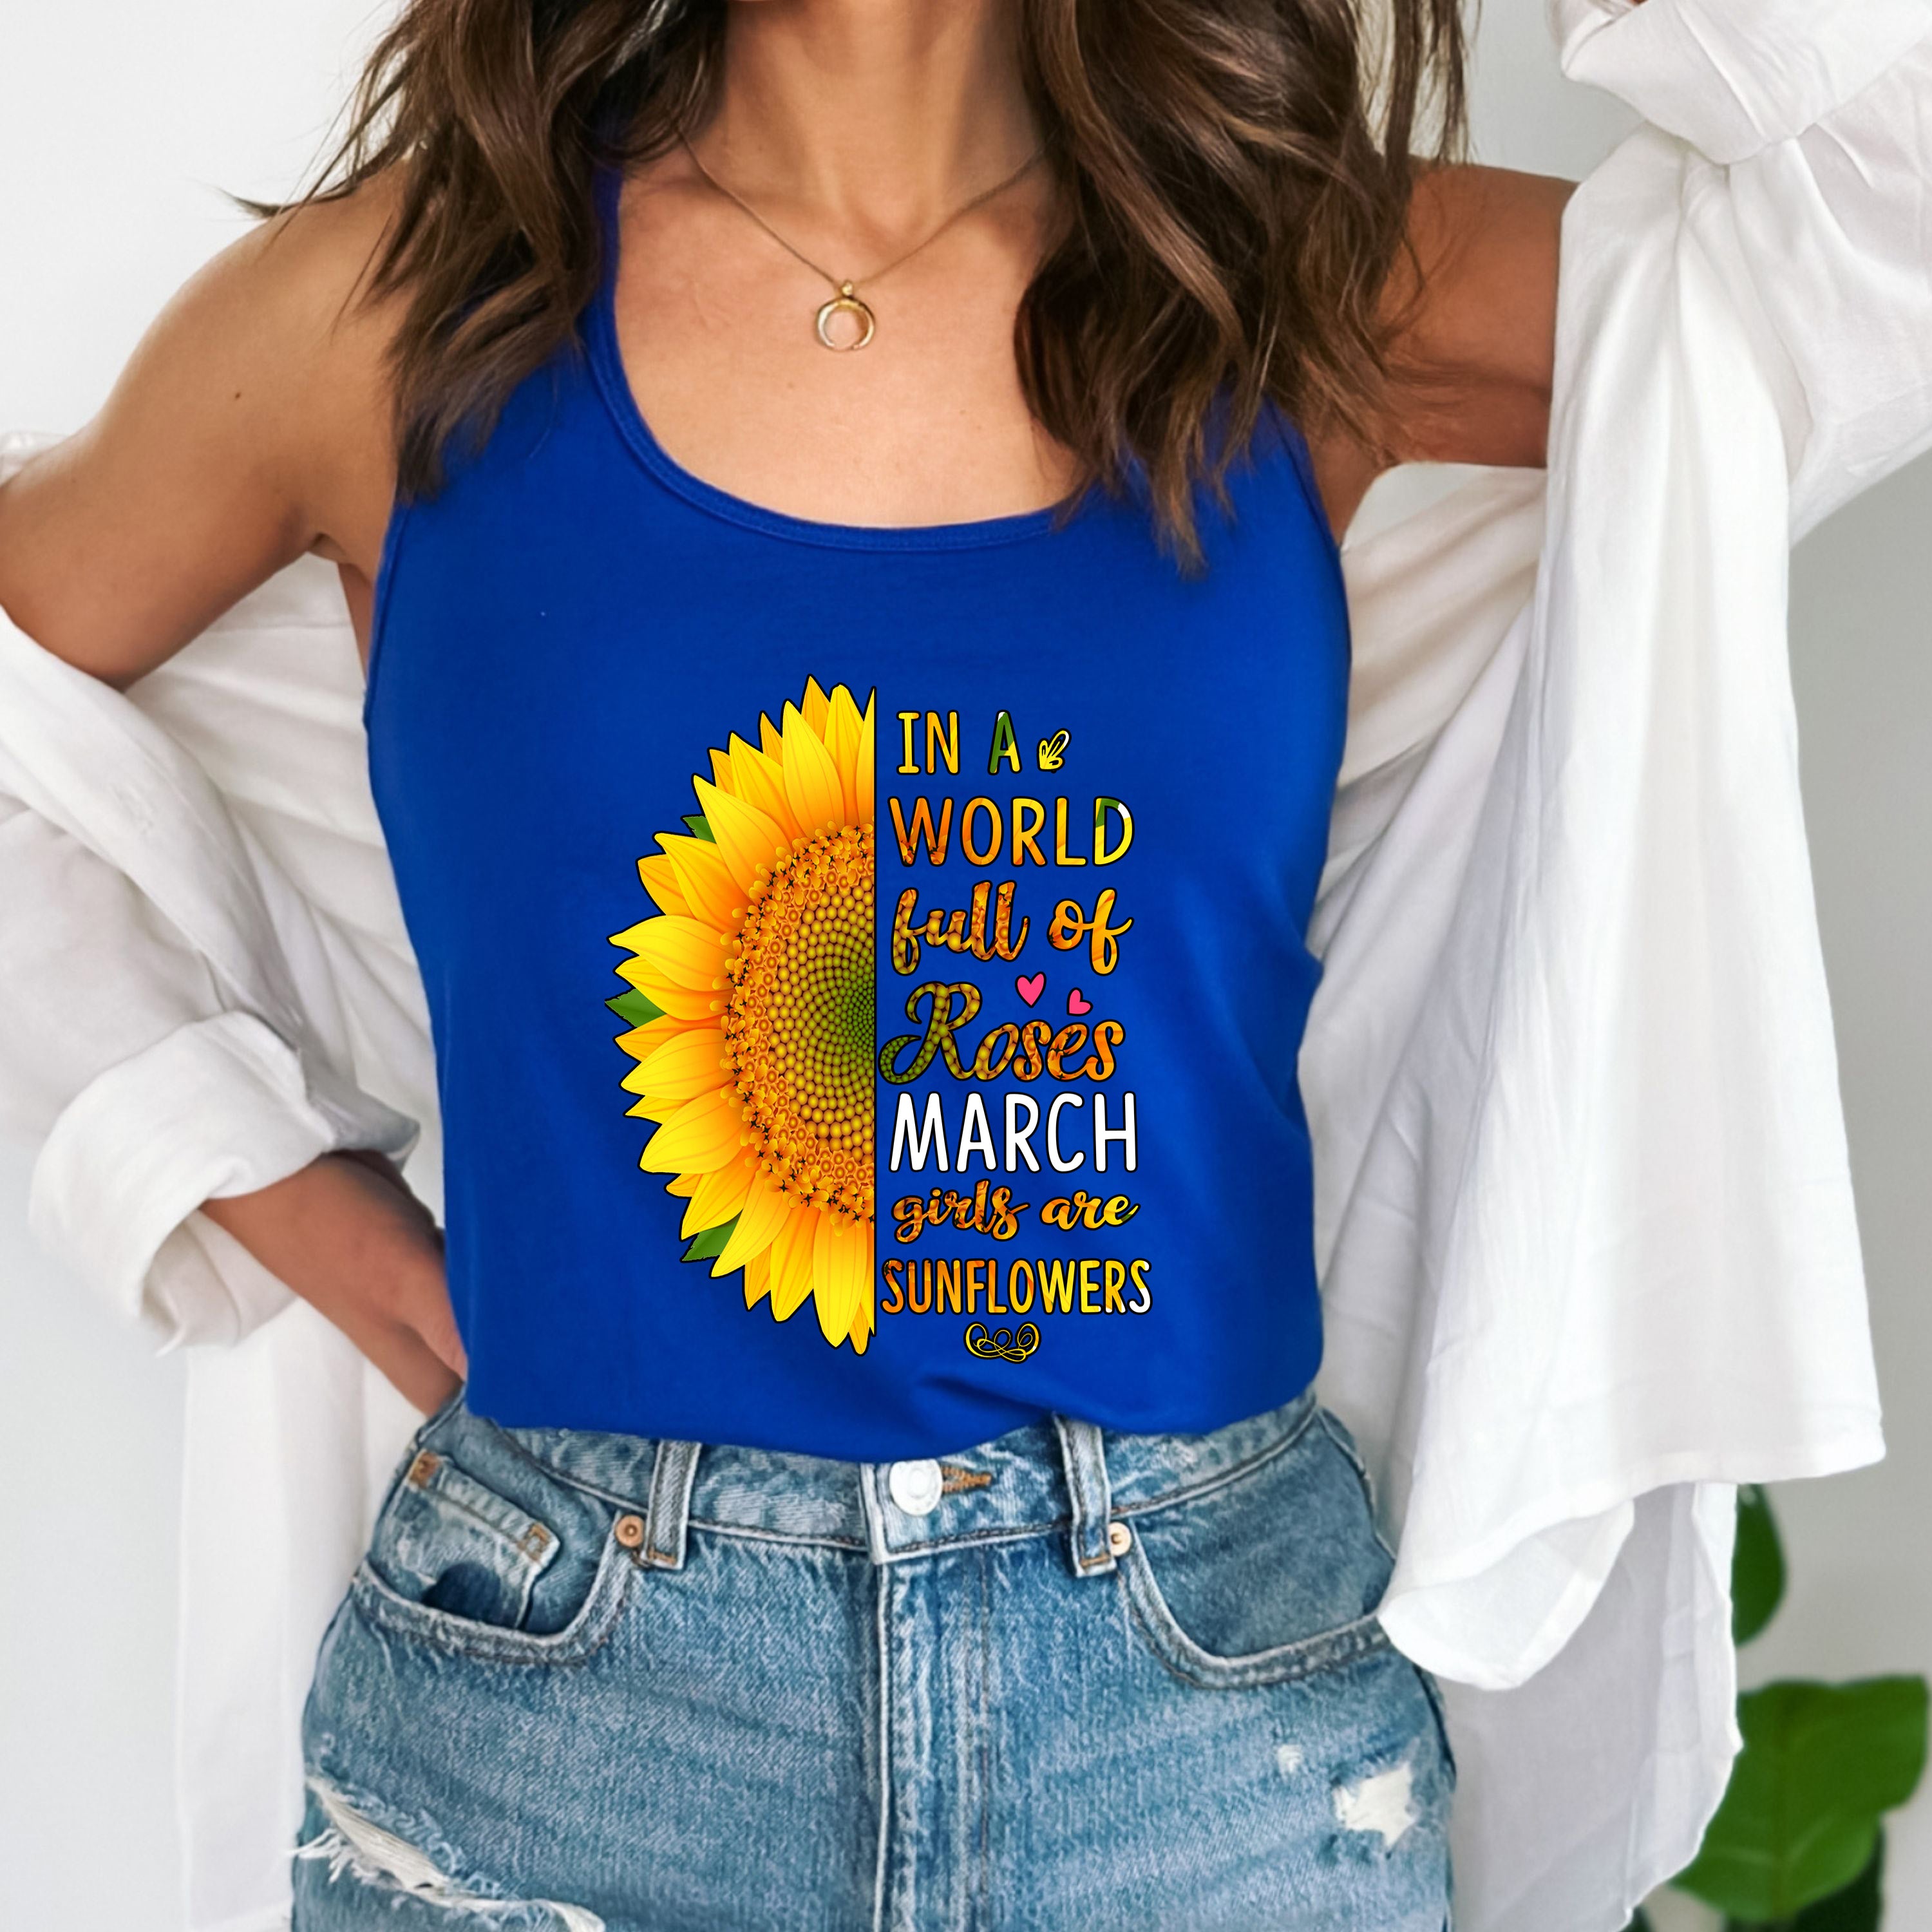 "In a world full of roses March girls are Sunflowers"